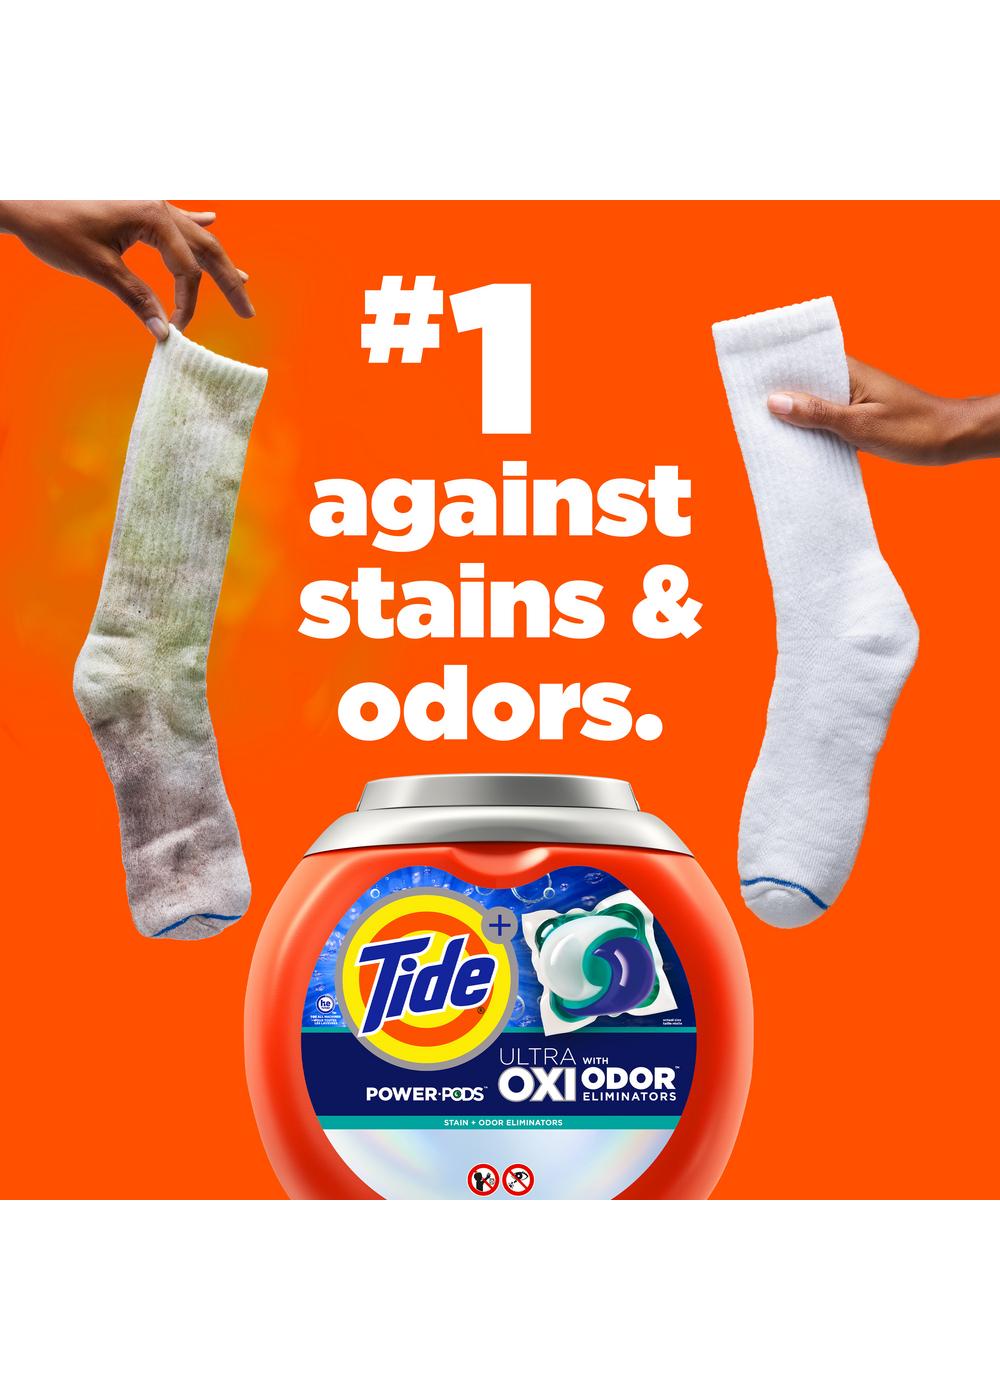 Tide Power PODS Ultra Oxi HE Laundry Detergent; image 3 of 8